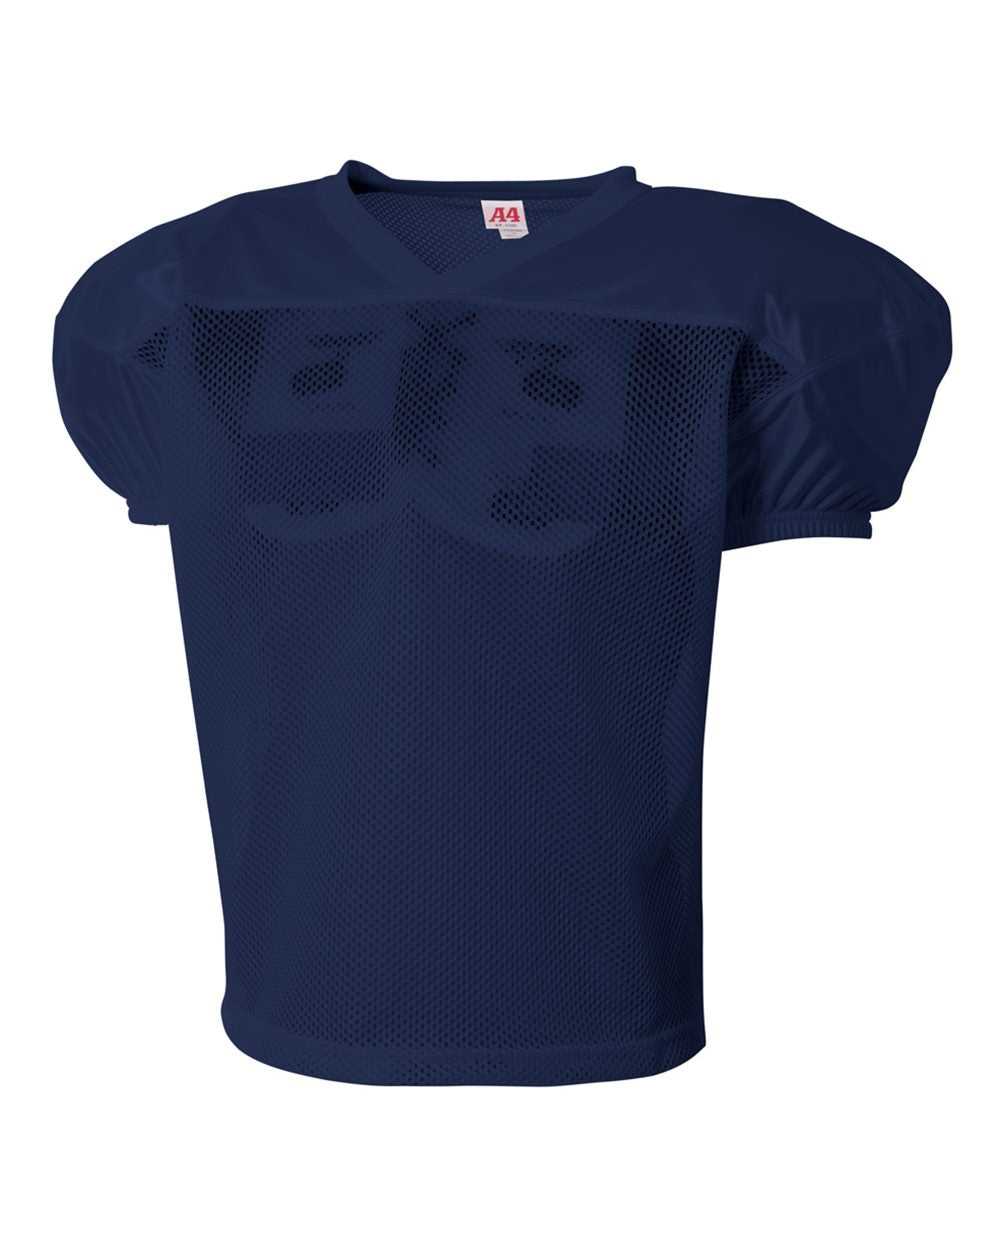 A4 NB4260 Youth Drills Practice Jersey - Navy - HIT a Double